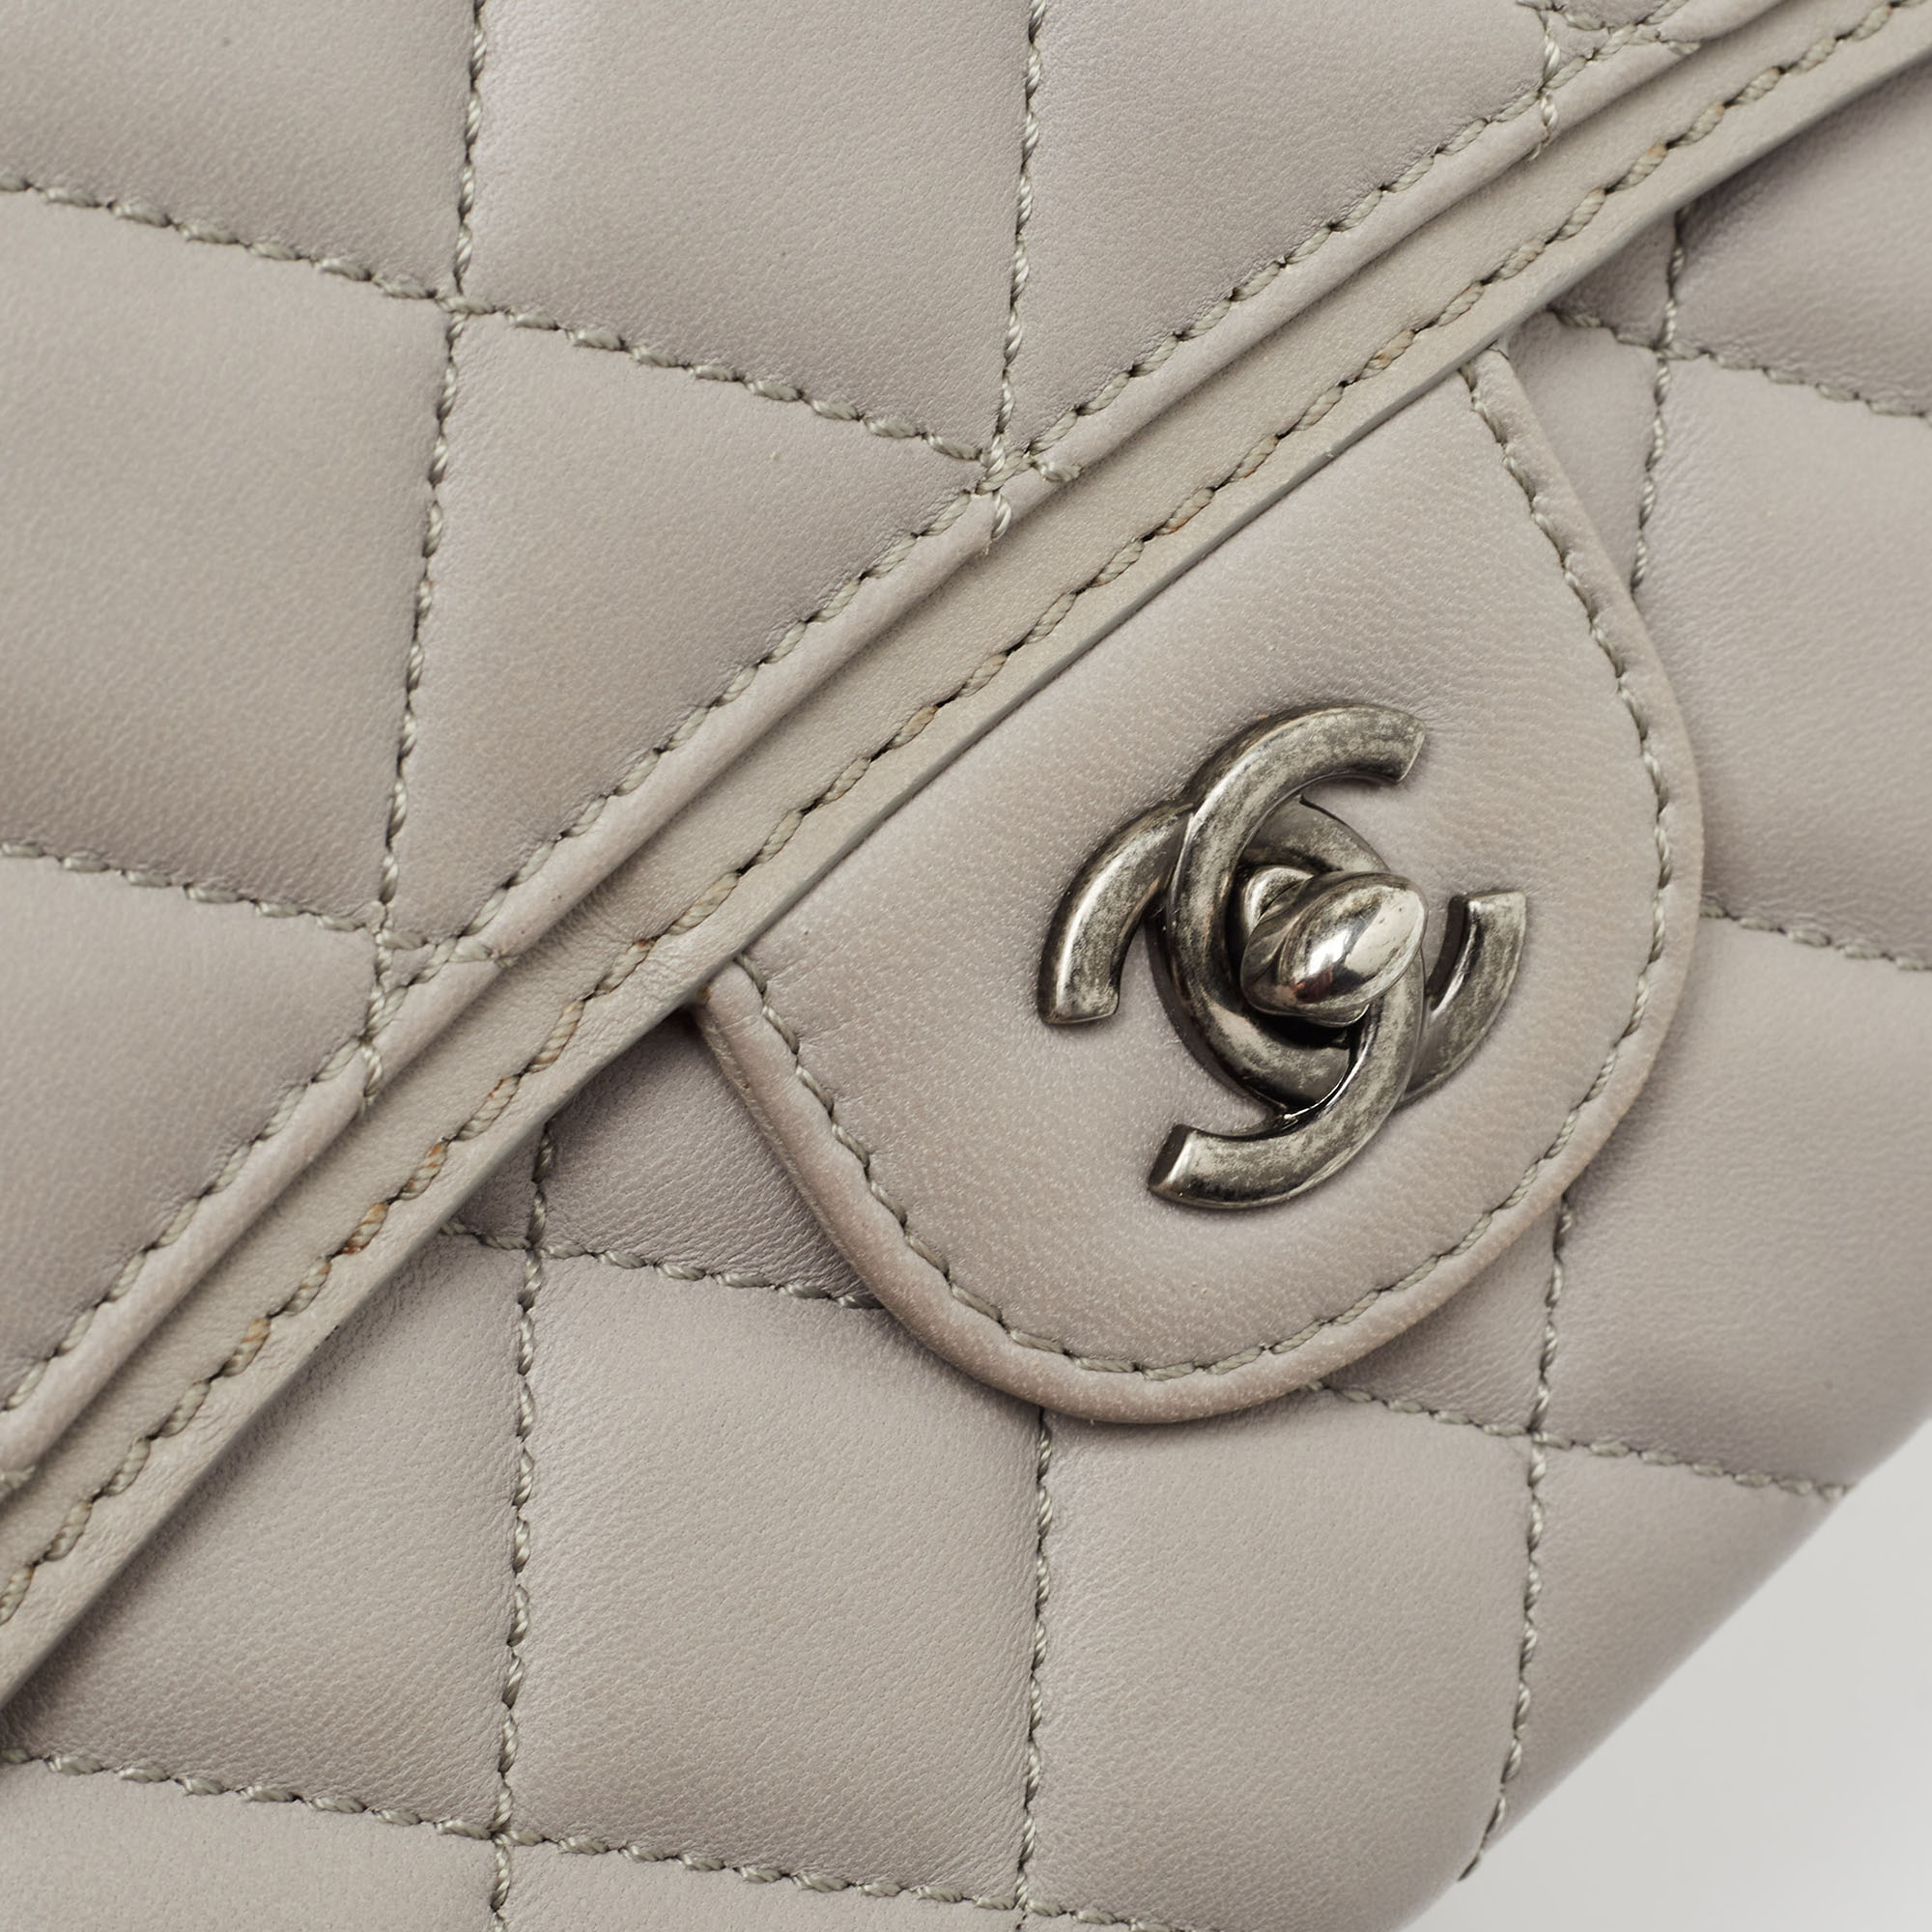 Chanel Grey Quilted Leather Single Flap Bag